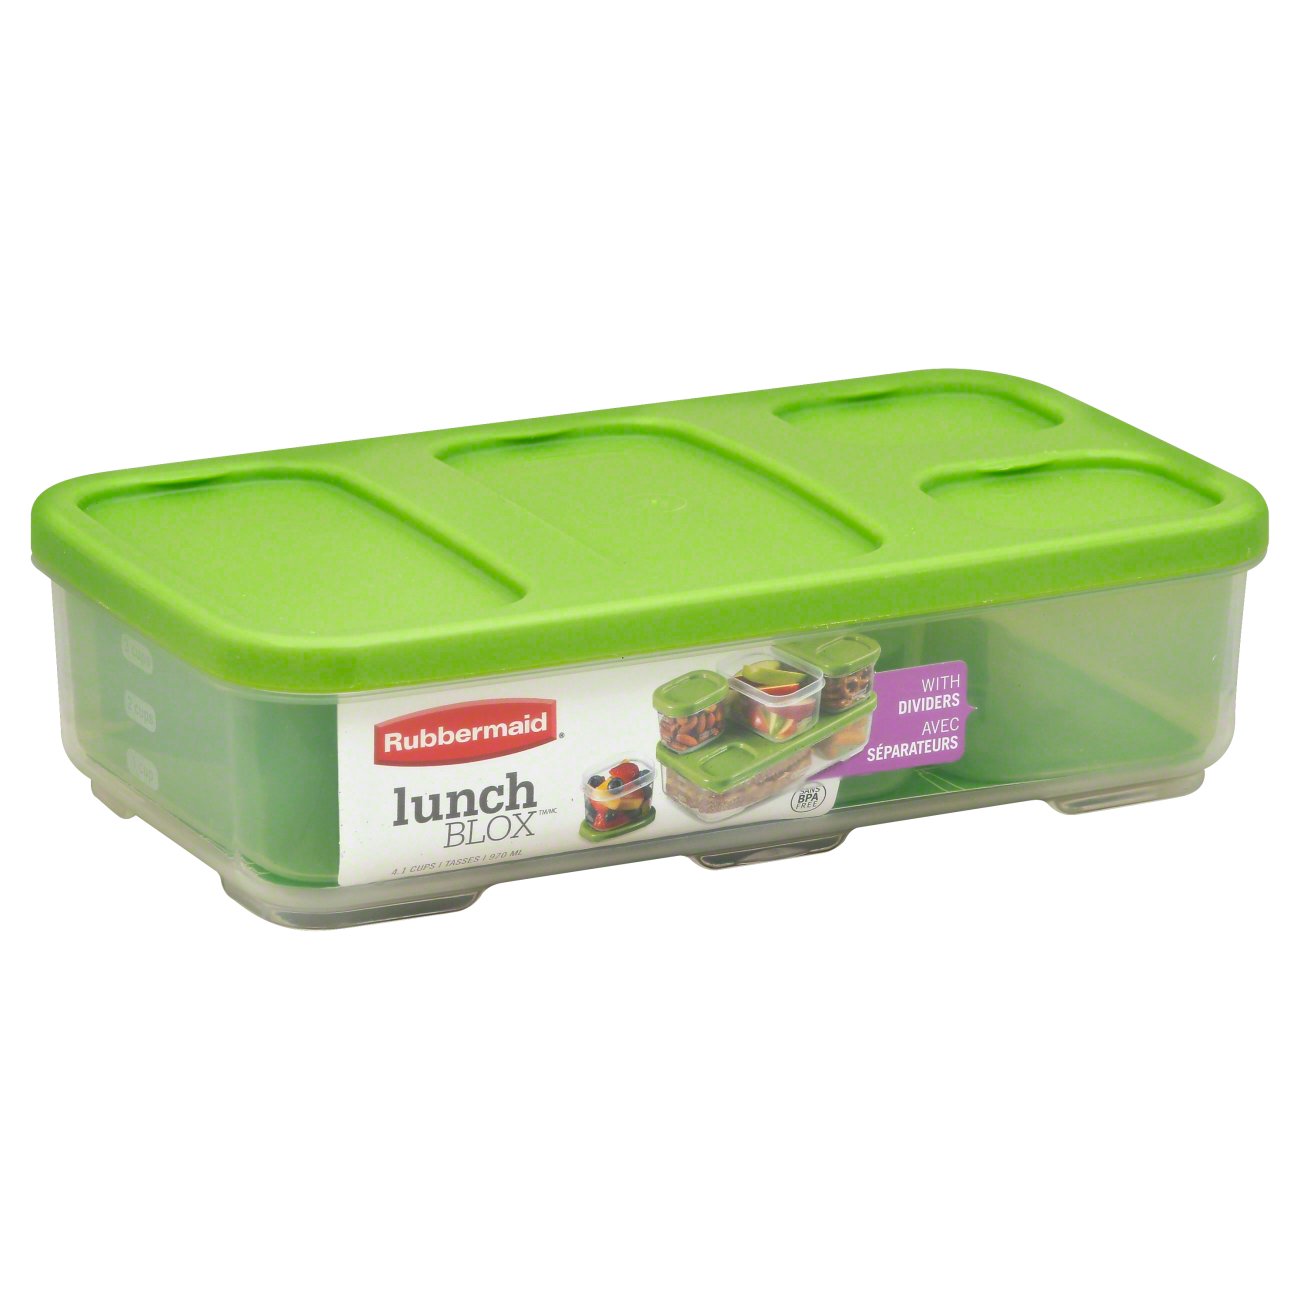 Rubbermaid Lunch Blox Entree Container with Dividers